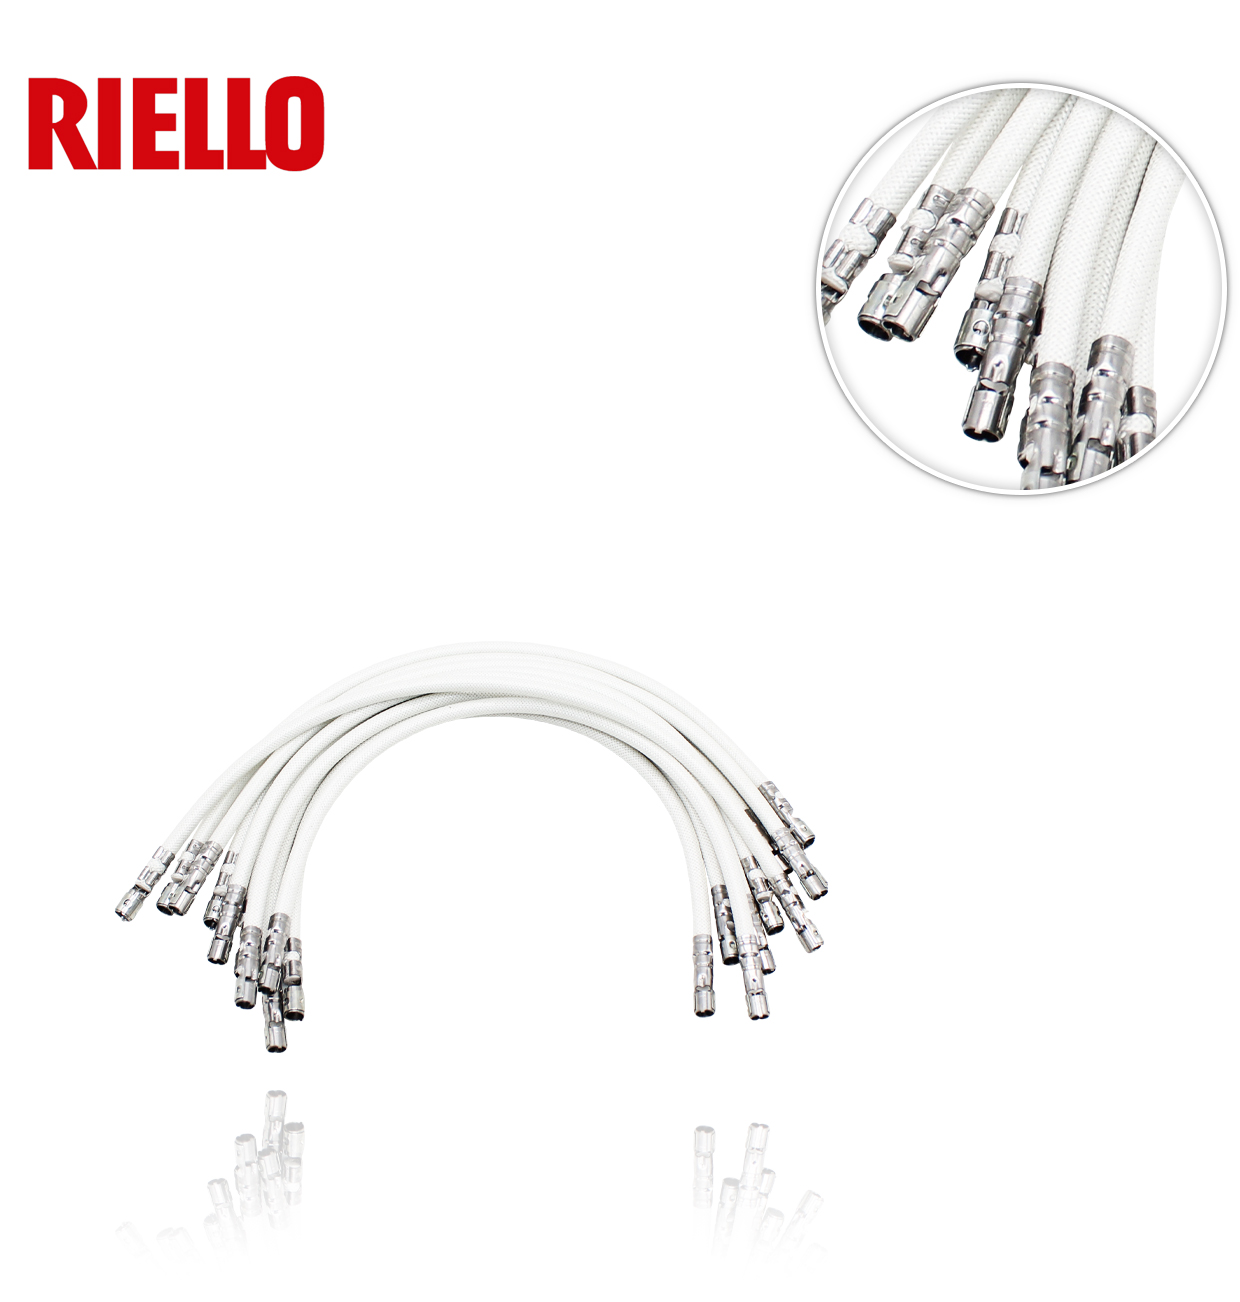 CABLE (KIT 10uds.)  RIELLO 3012281